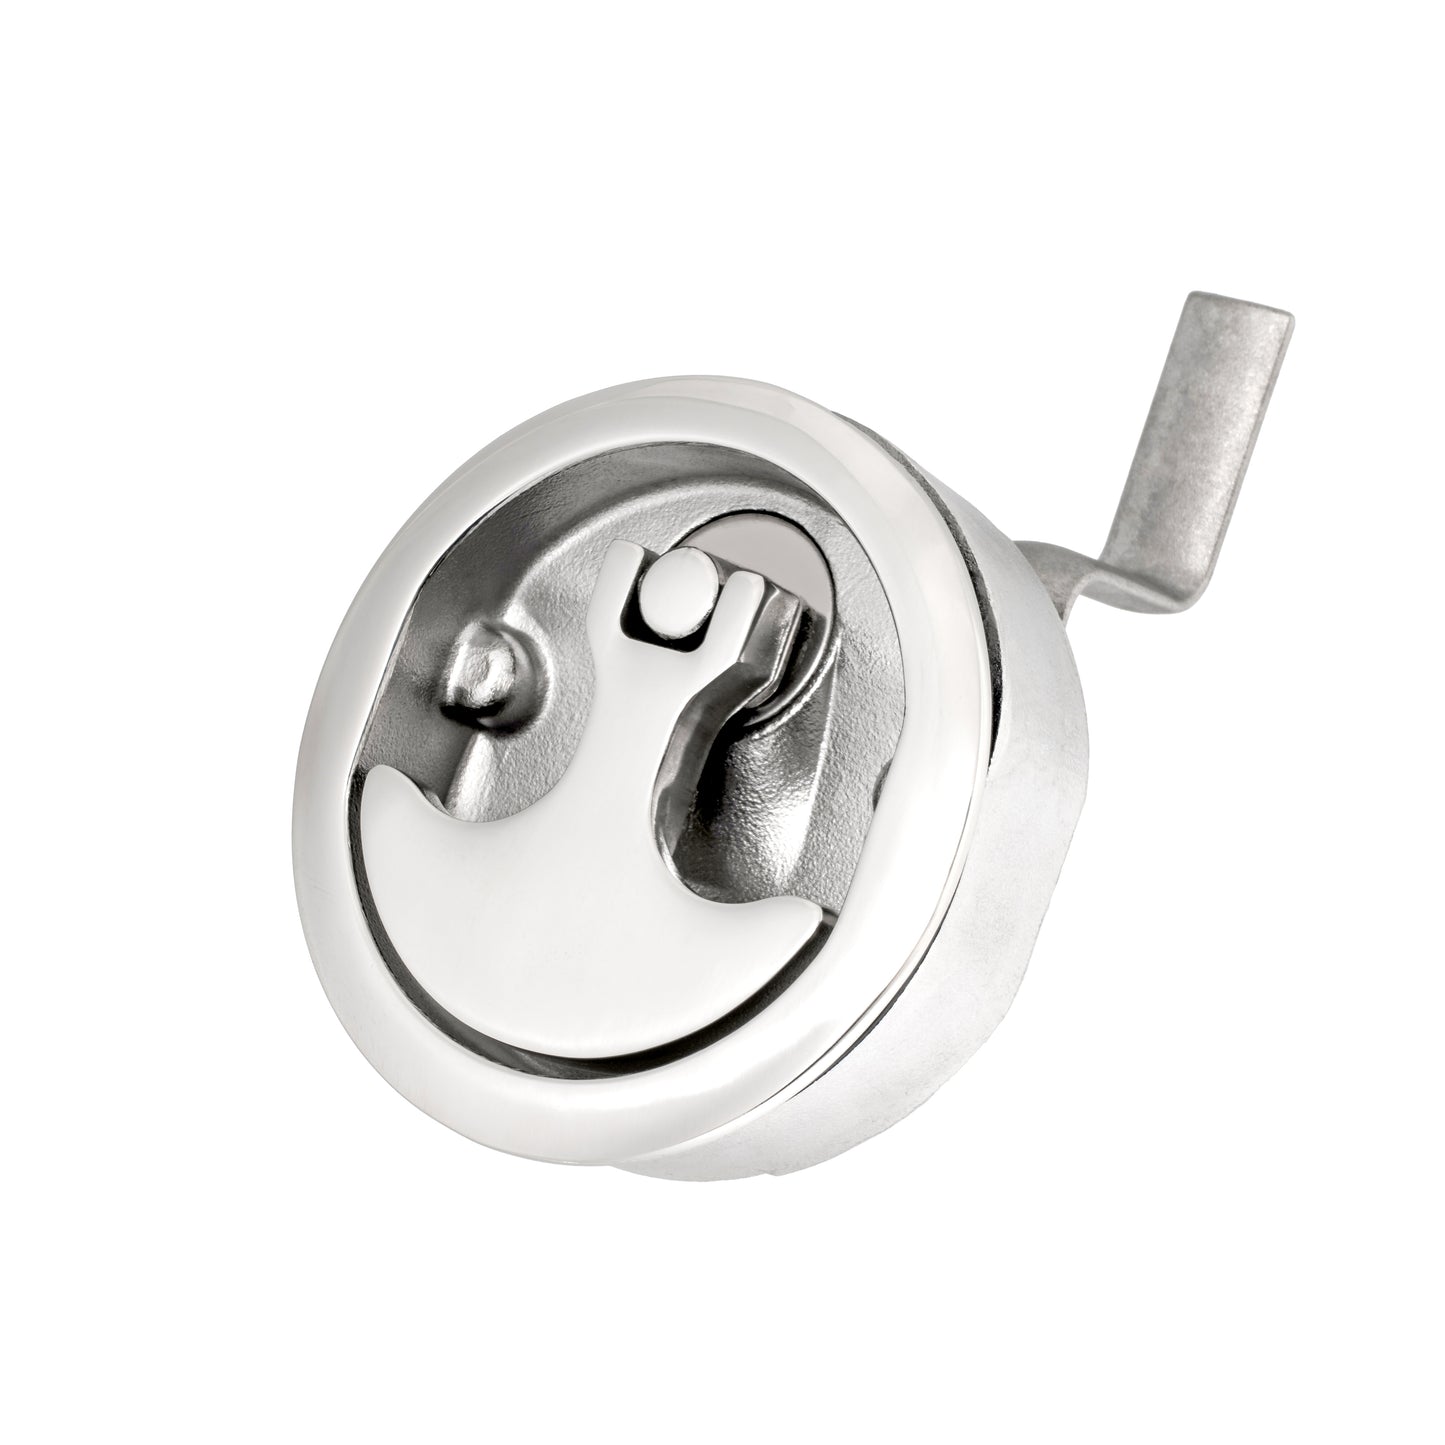 316 Stainless Steel Compression Handle - 3" Non-Locking